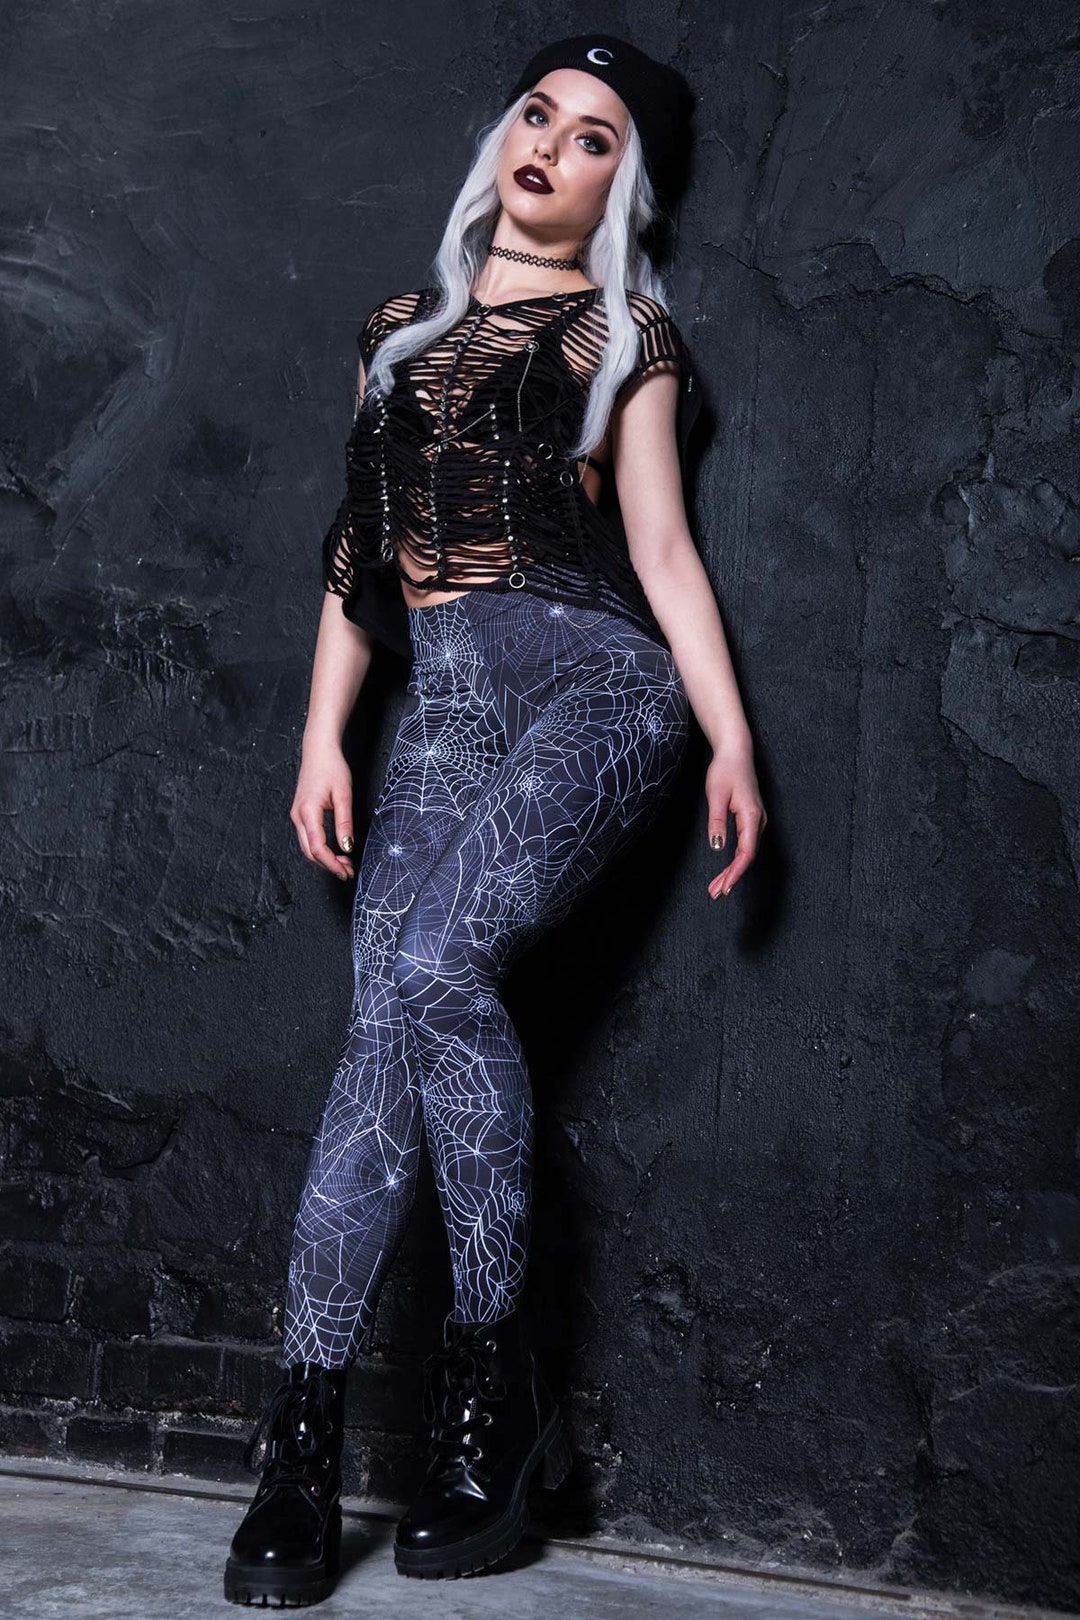 Body Suit Stretch Spiderweb on Black Lace Goth Wiccan Halloween Leggings  Bras Apparel Halloween Fabric 